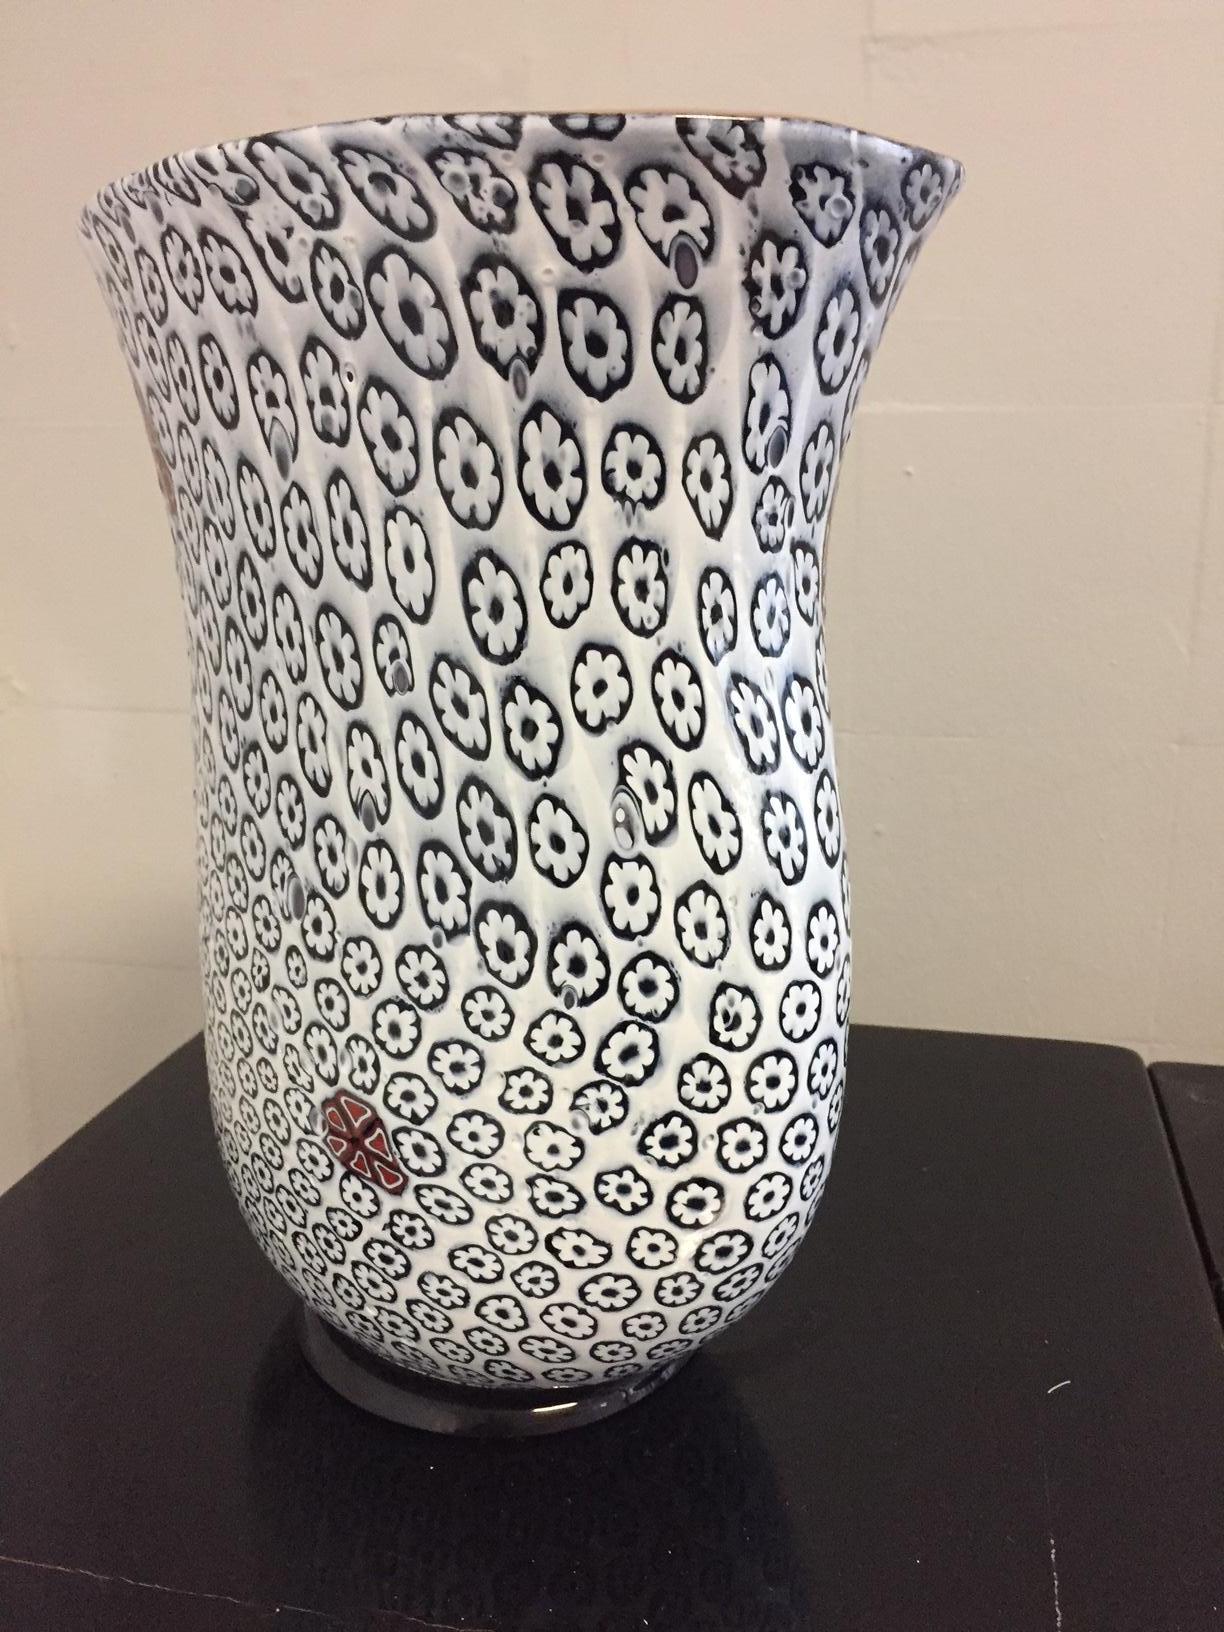 Hand-Crafted Unique Vase in Floral Pattern White and Black by Tino Rossi Murano For Sale